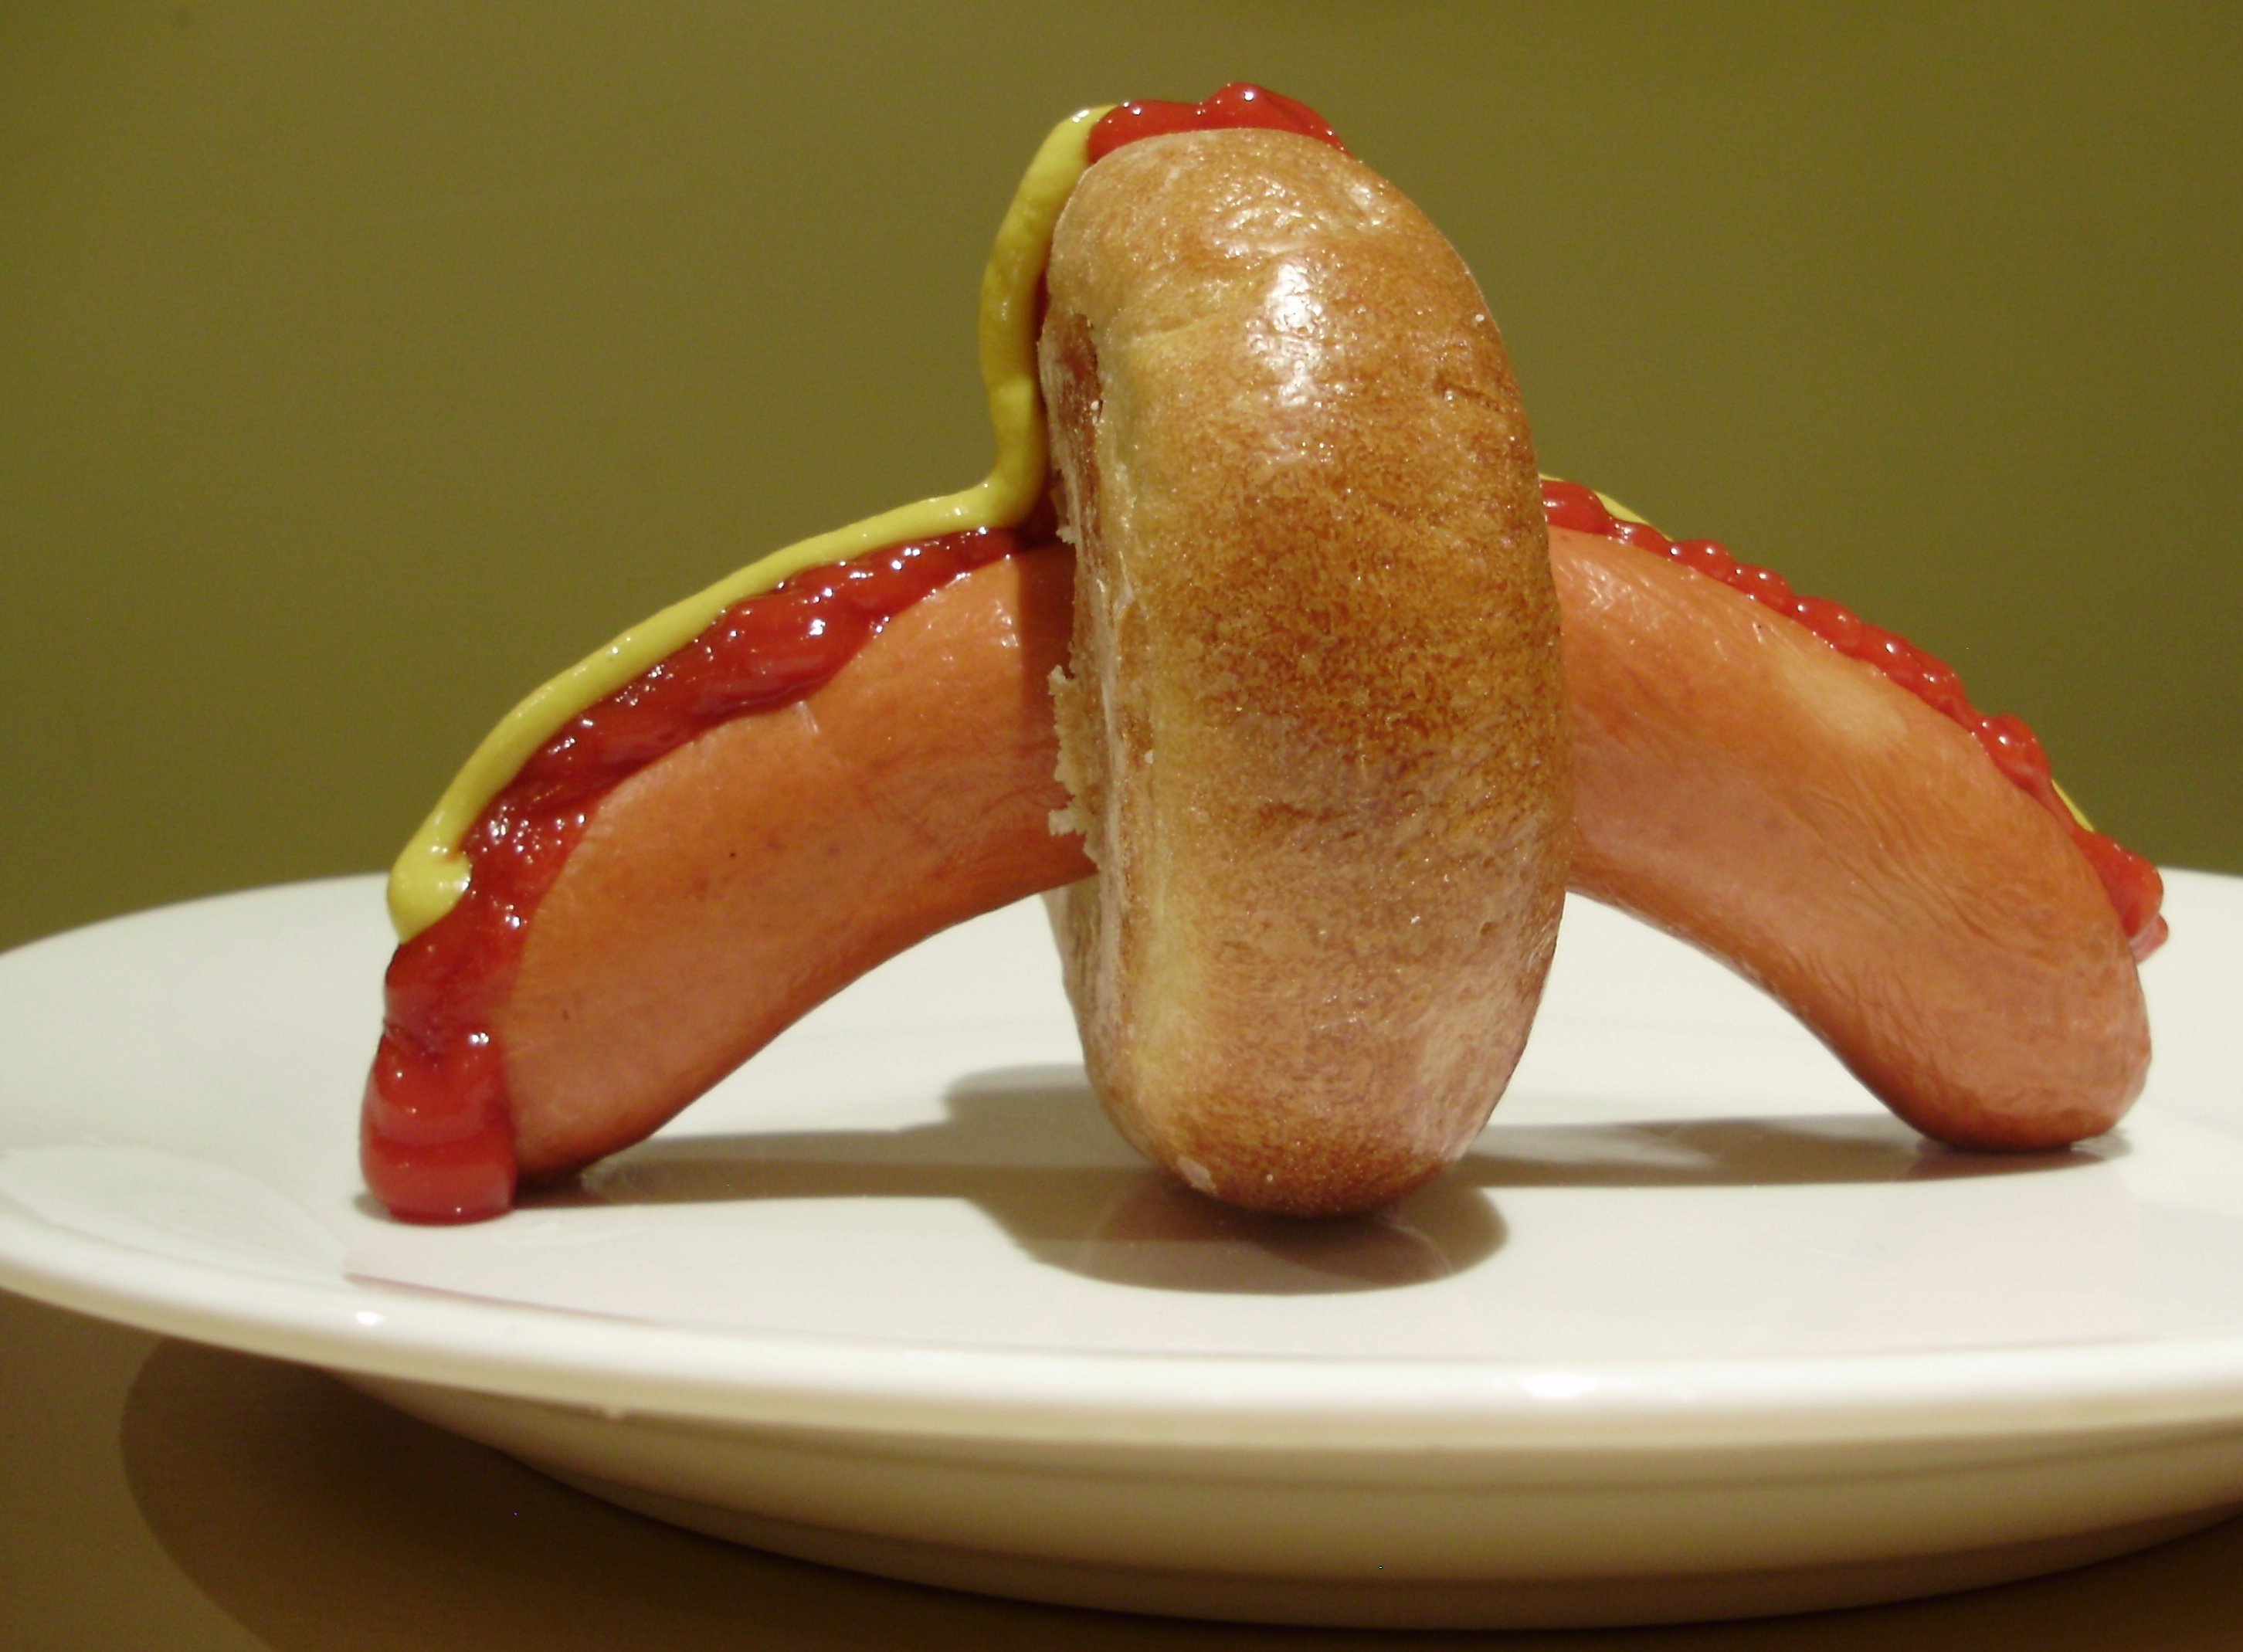 What is in a hot dog?